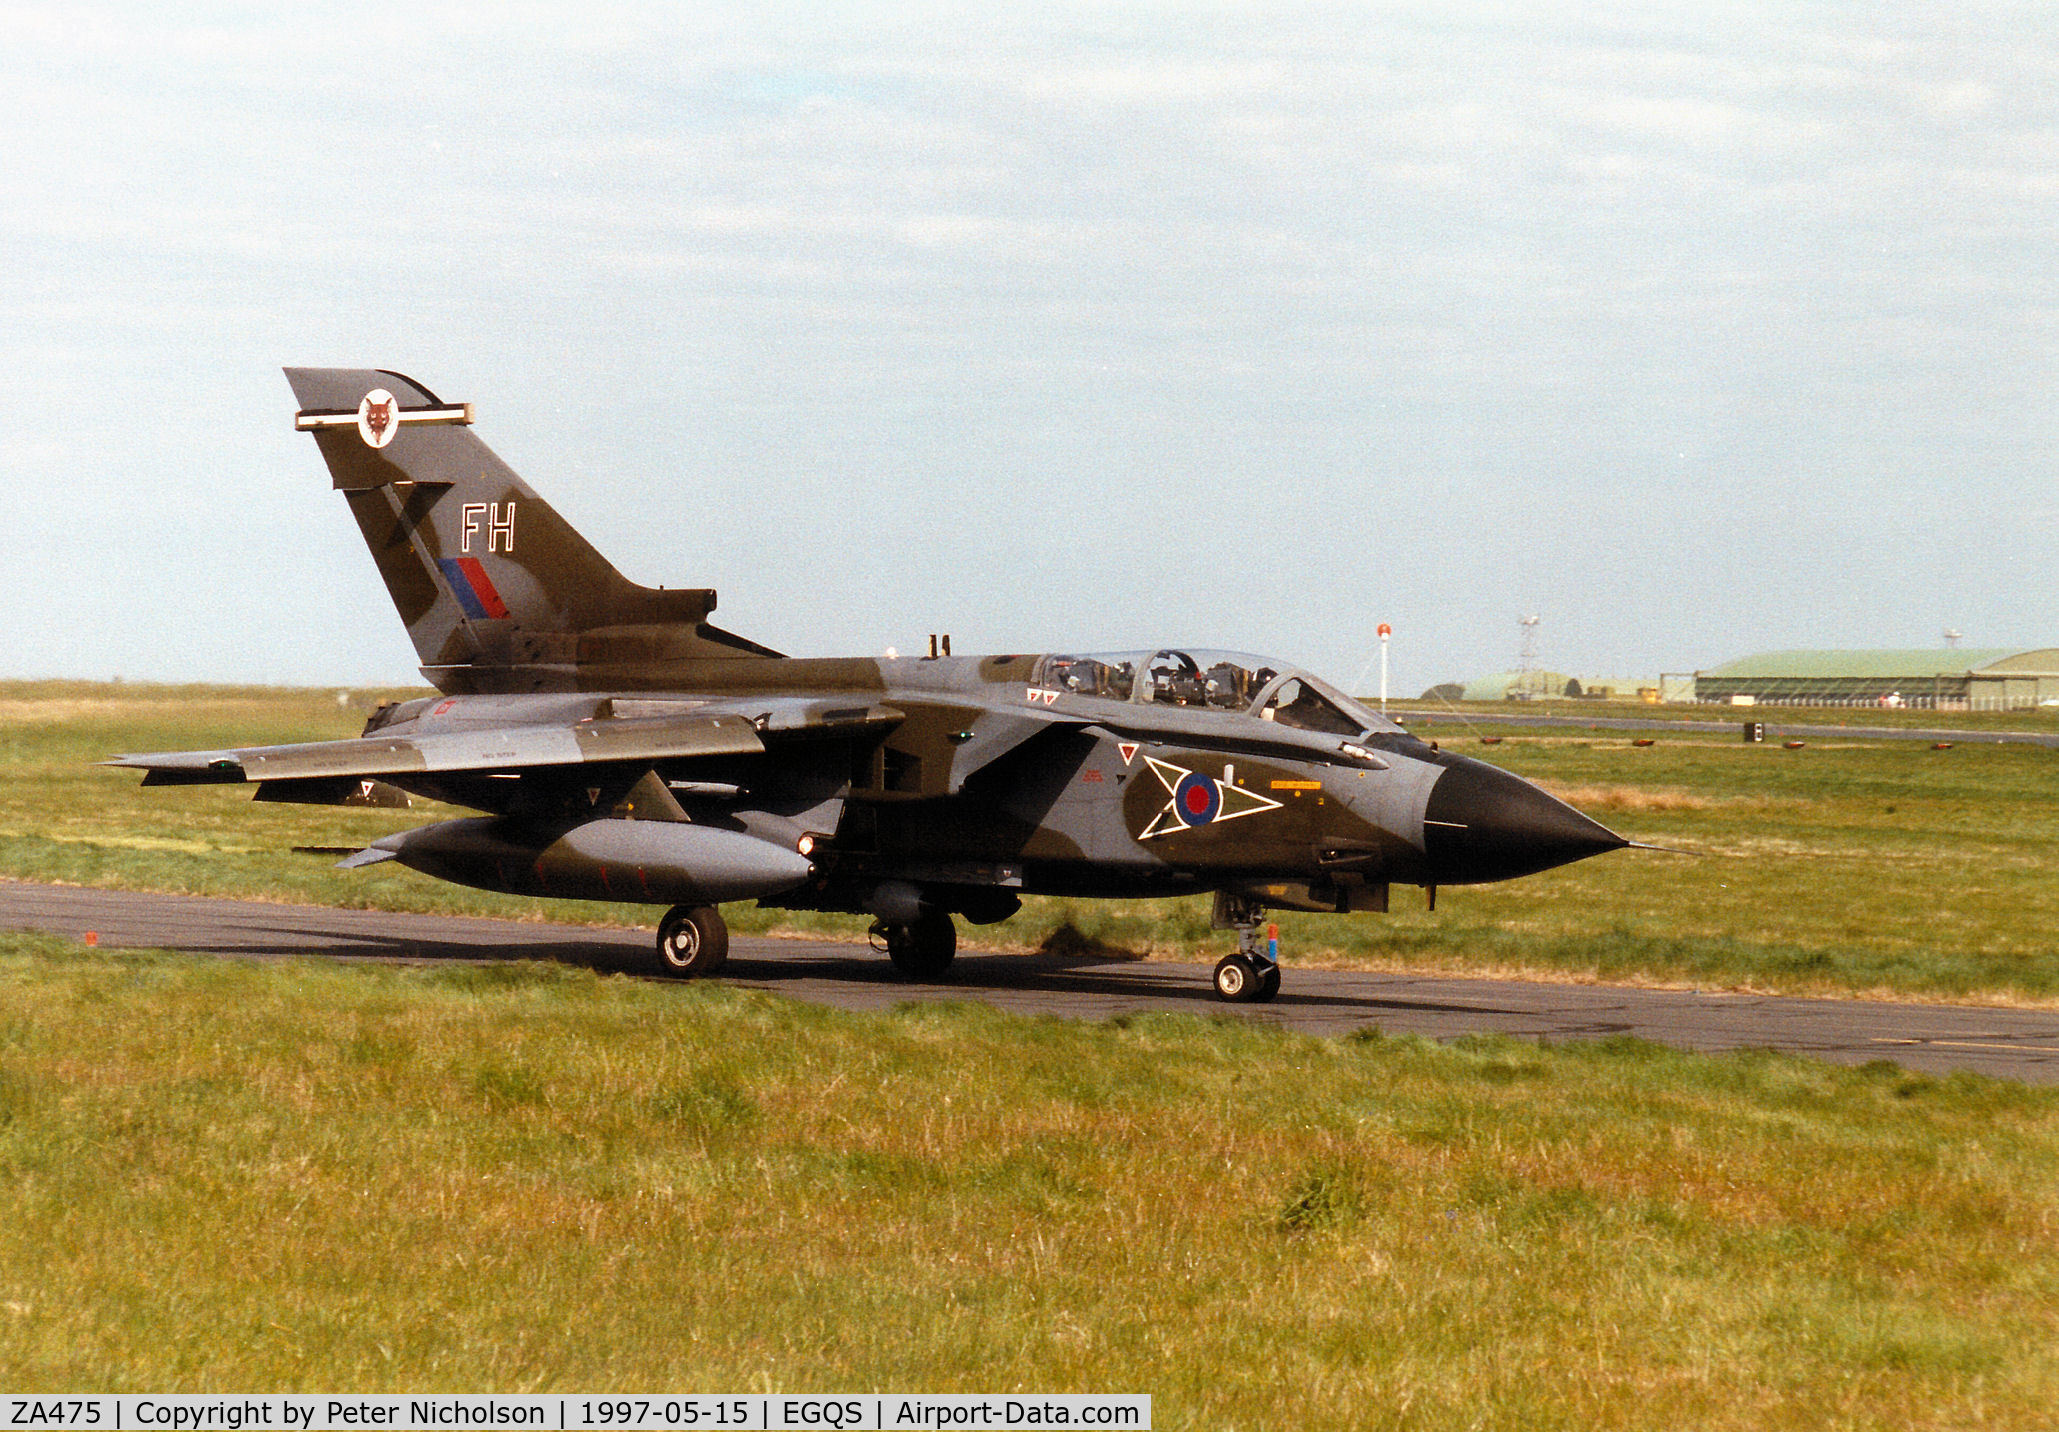 ZA475, 1983 Panavia Tornado GR.1 C/N 302/BS105/3141, Tornado GR.1, callsign Jackal 3, of 12 Squadron taxying to Runway 05 at RAF Lossiemouth in the Summer of 1997.